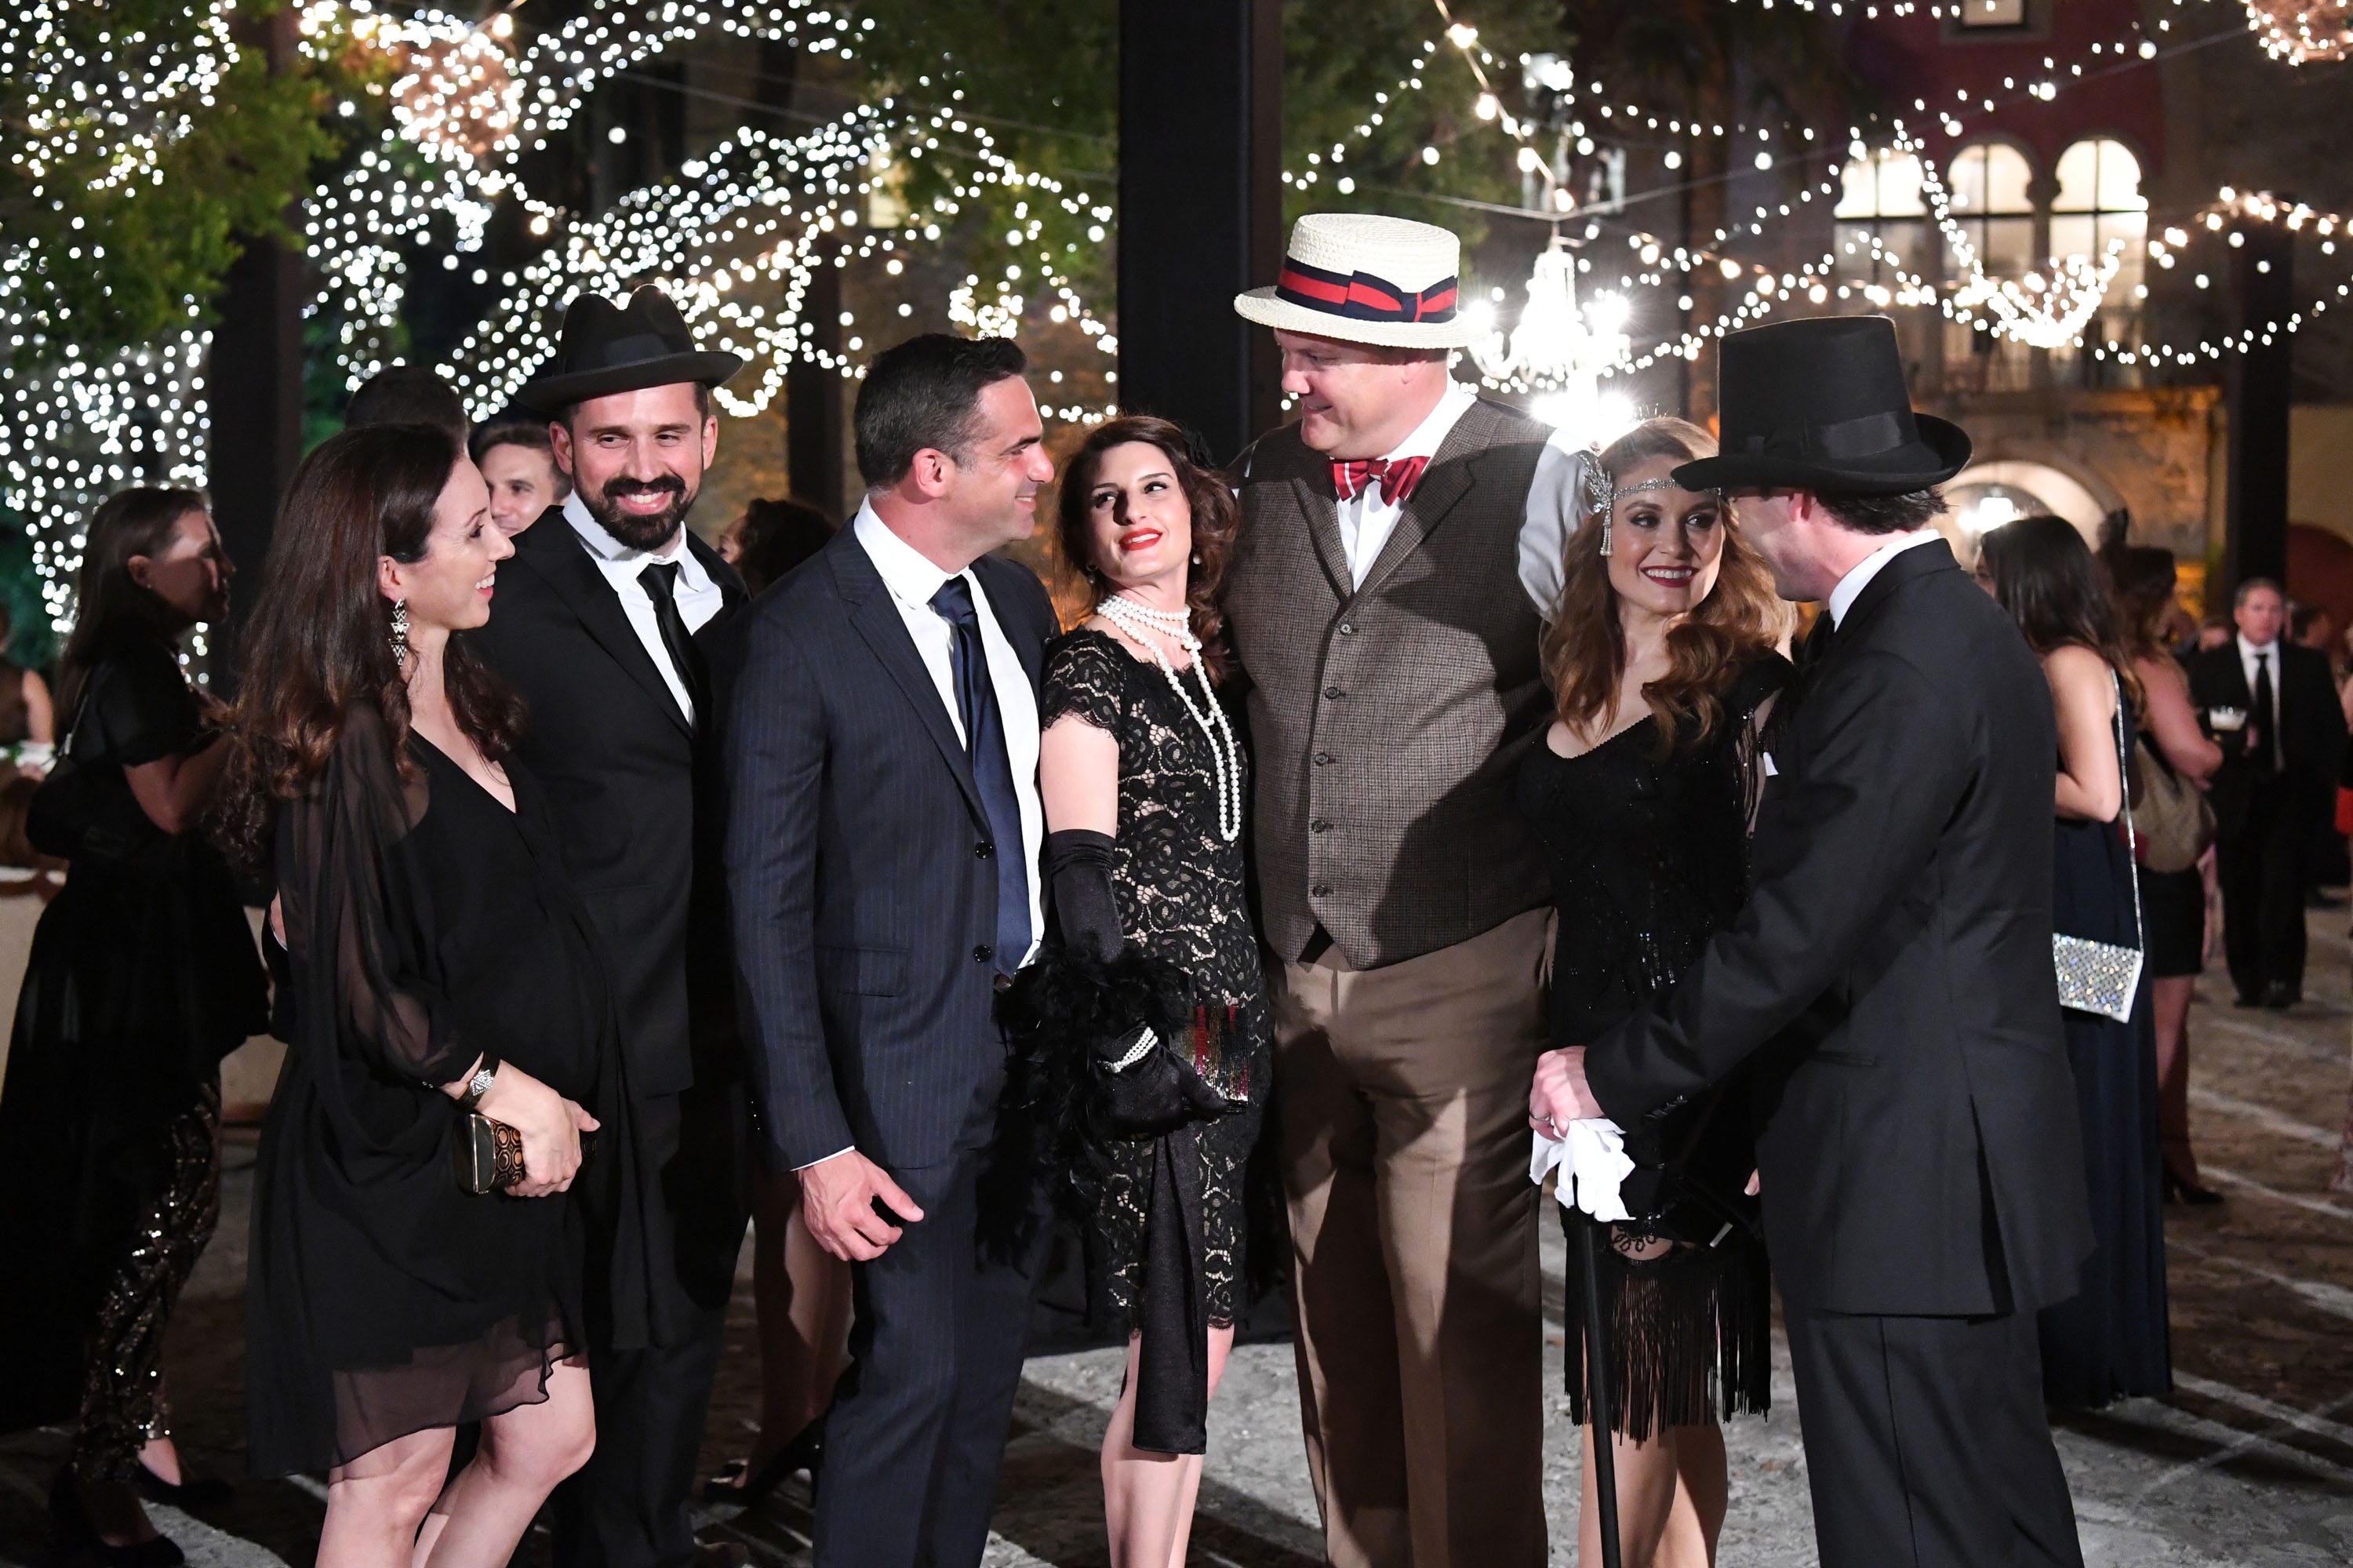 Group dressed in classic 1920's clothing for Deering Estate's Spirits' Speakeasy event